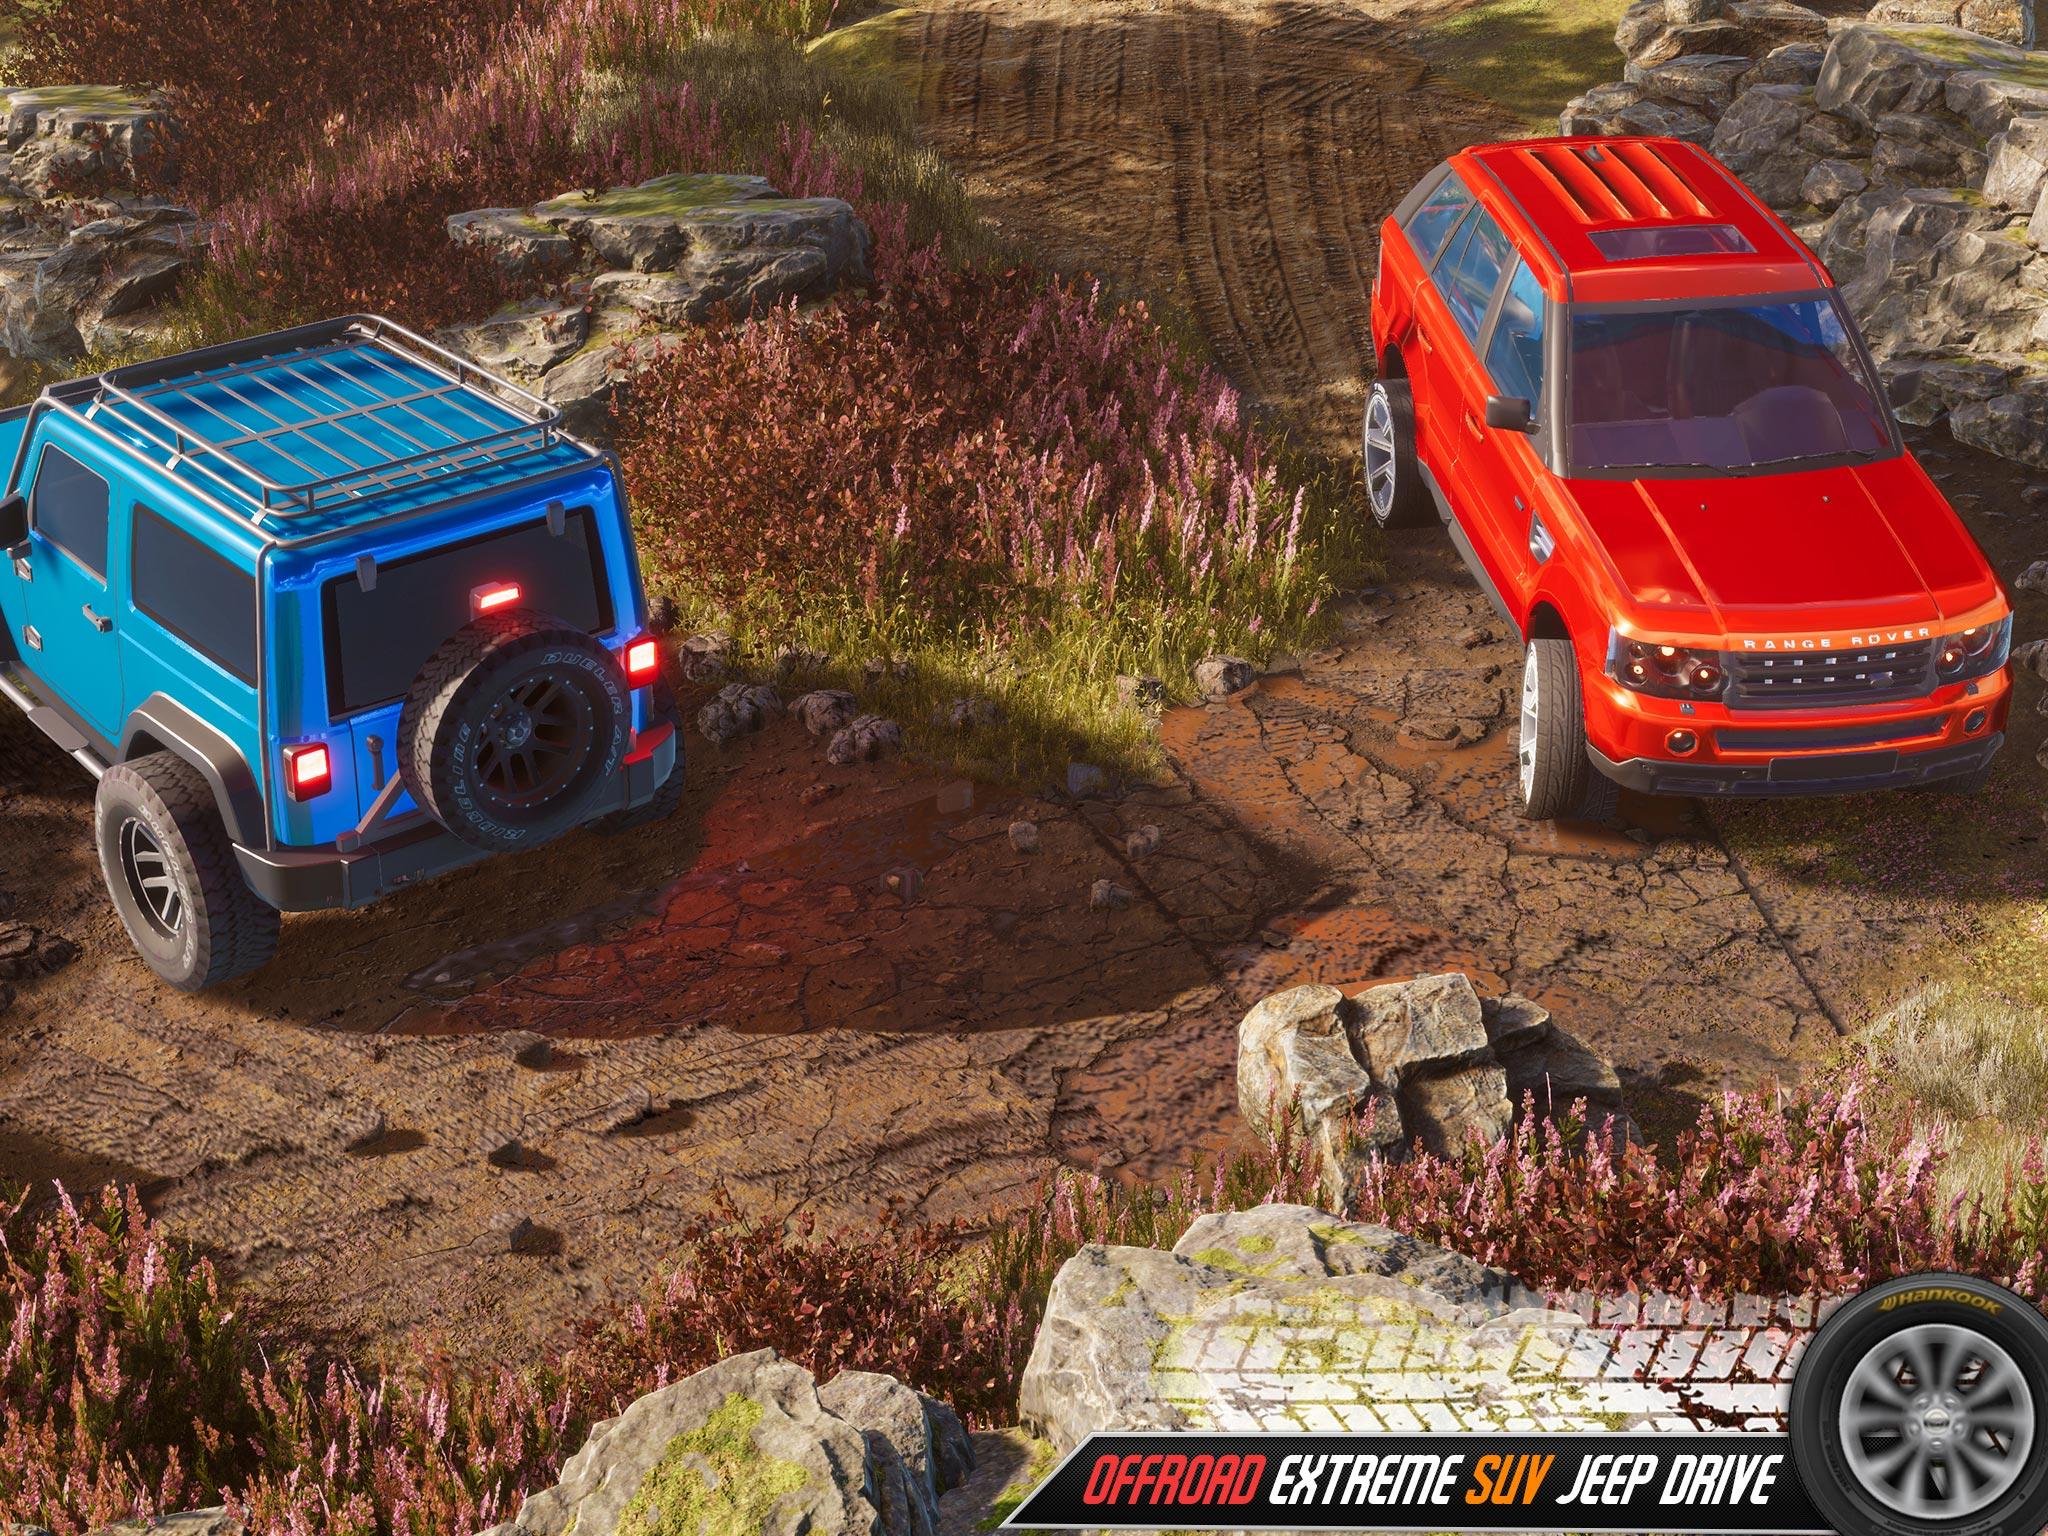 4x4 Offroad Jeep Games Driving screenshot game